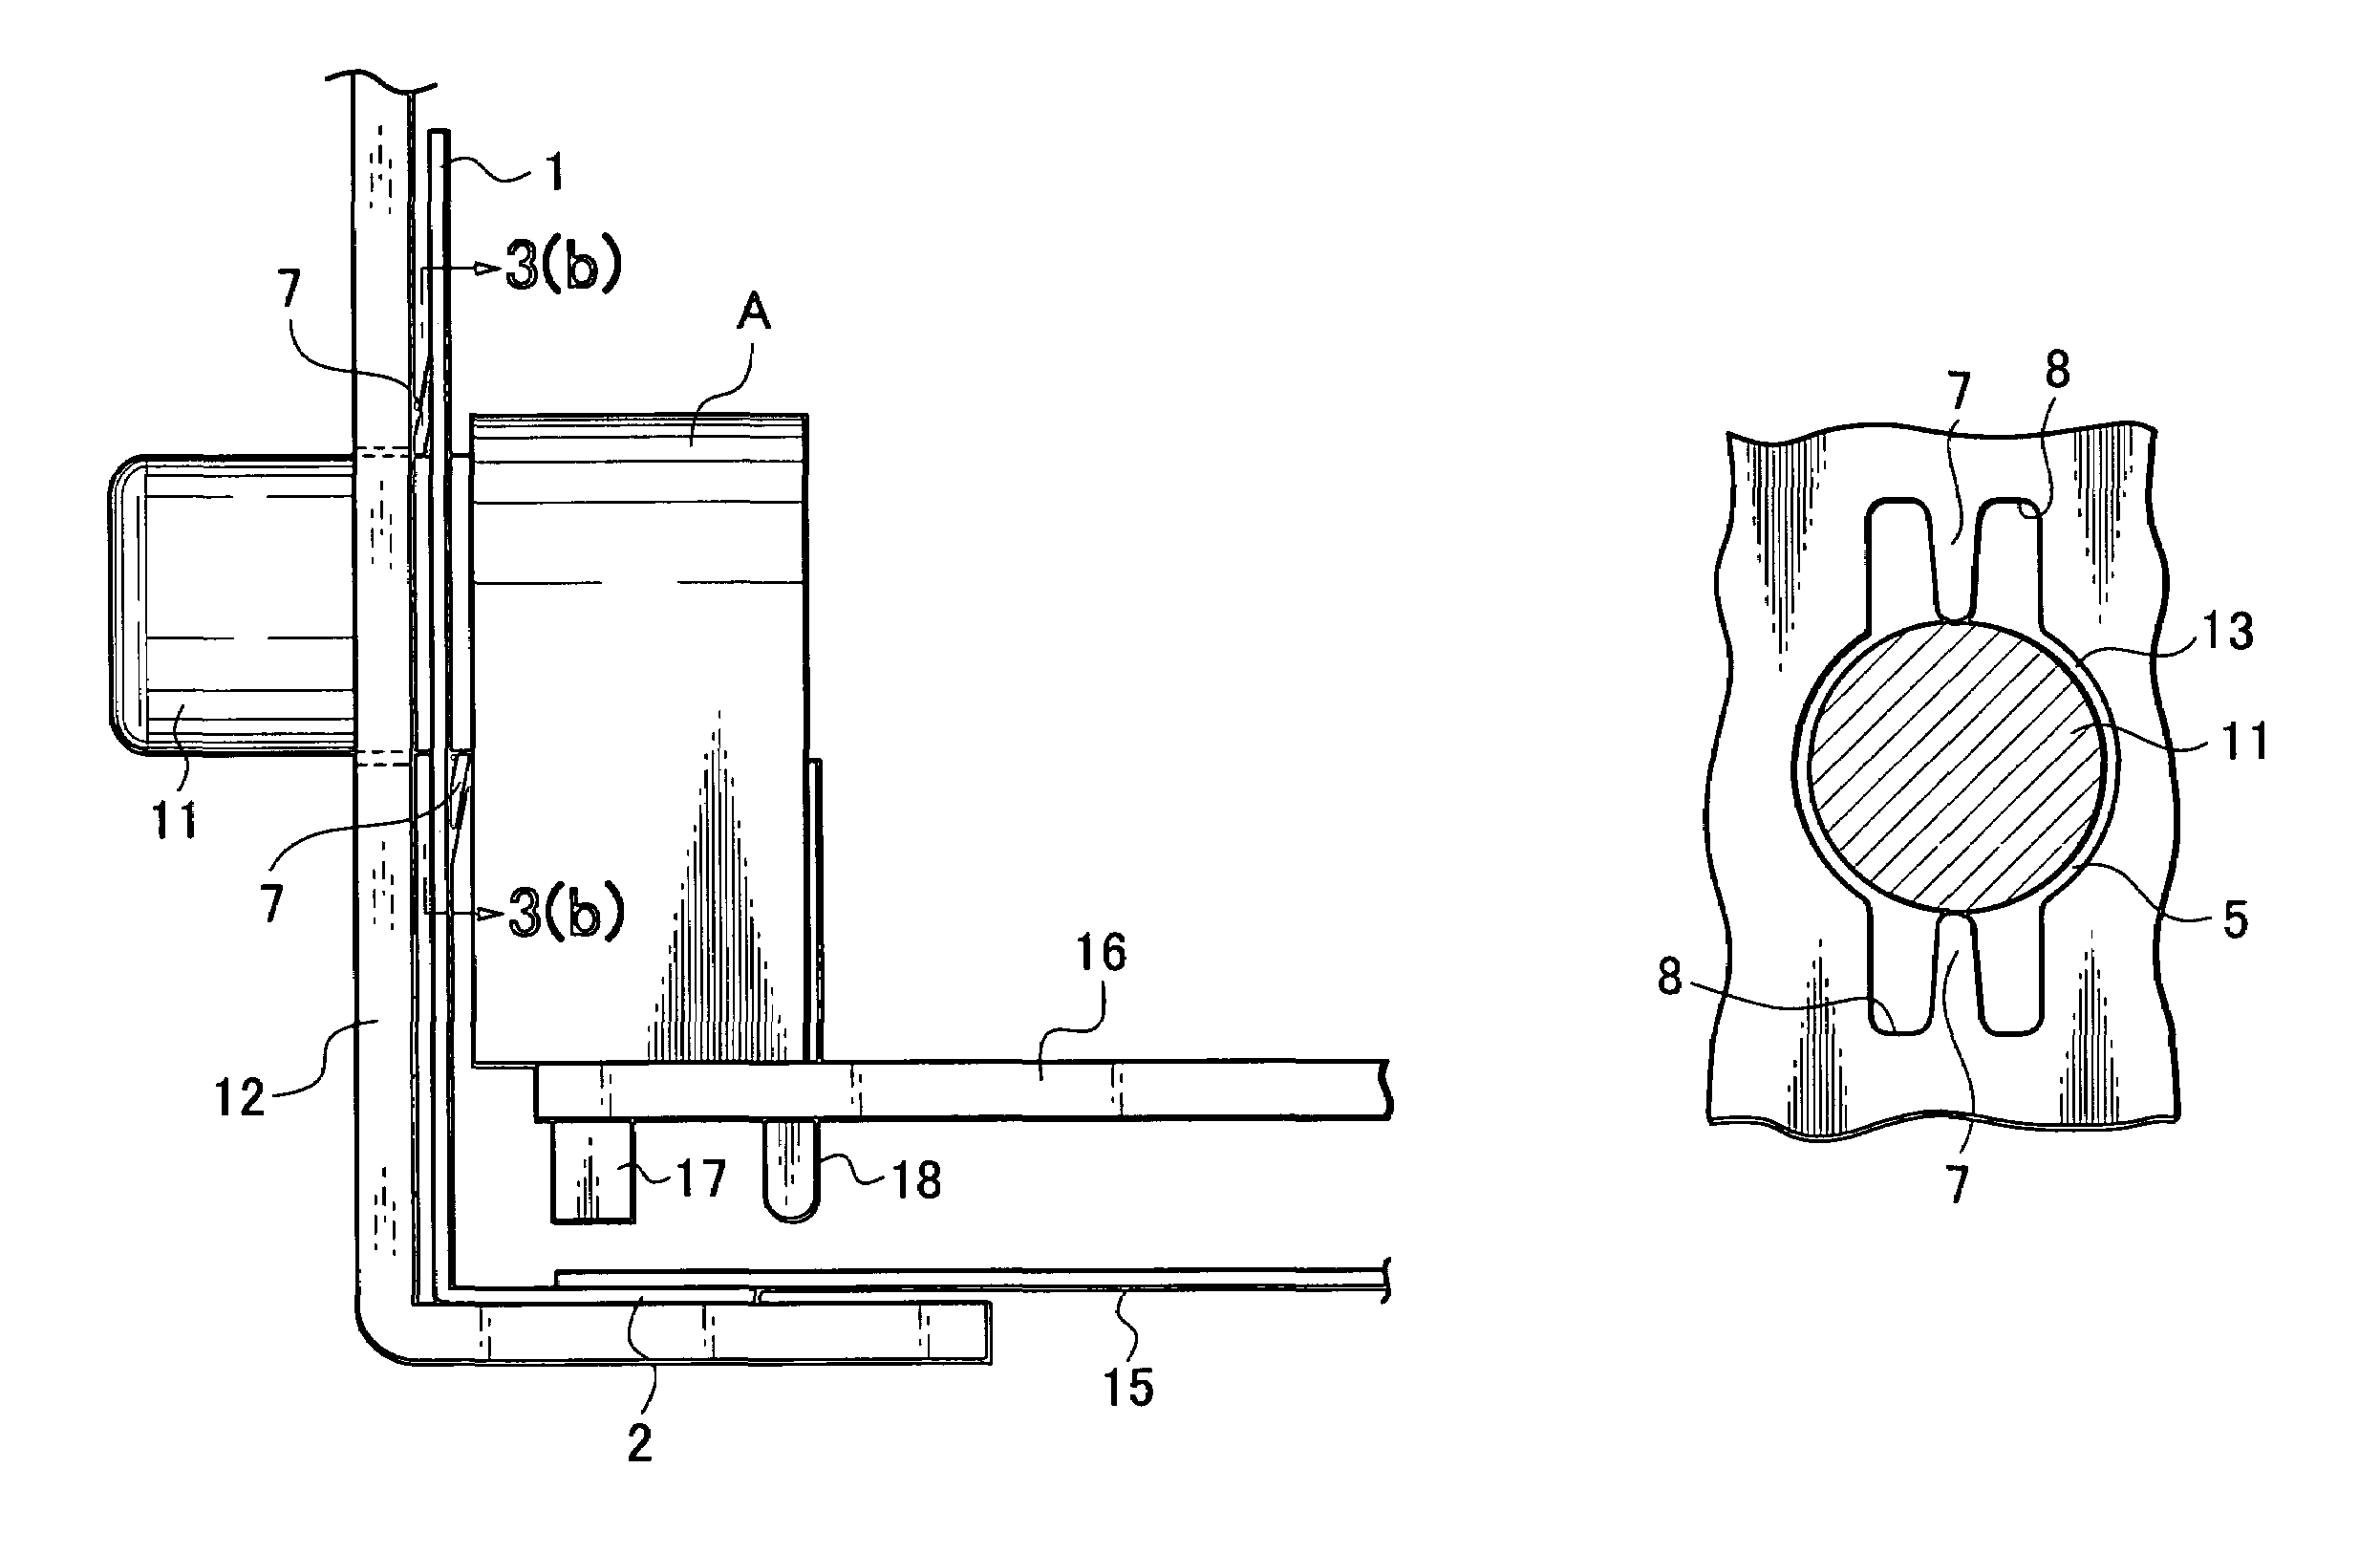 Ground metal fitting and ground structure for jacks of electronic devices